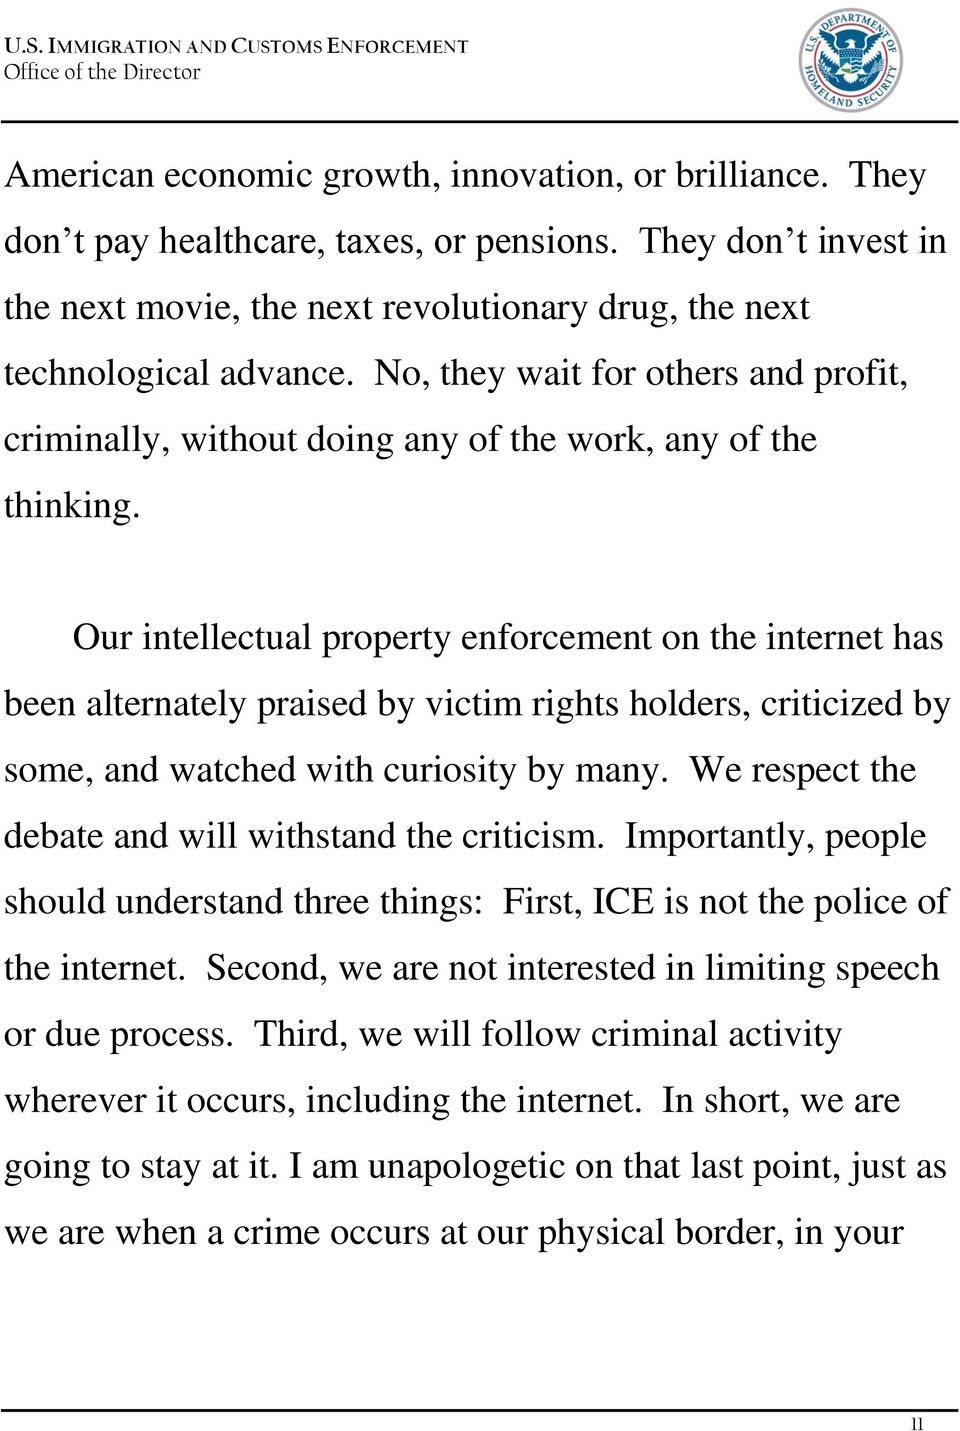 Our intellectual property enforcement on the internet has been alternately praised by victim rights holders, criticized by some, and watched with curiosity by many.